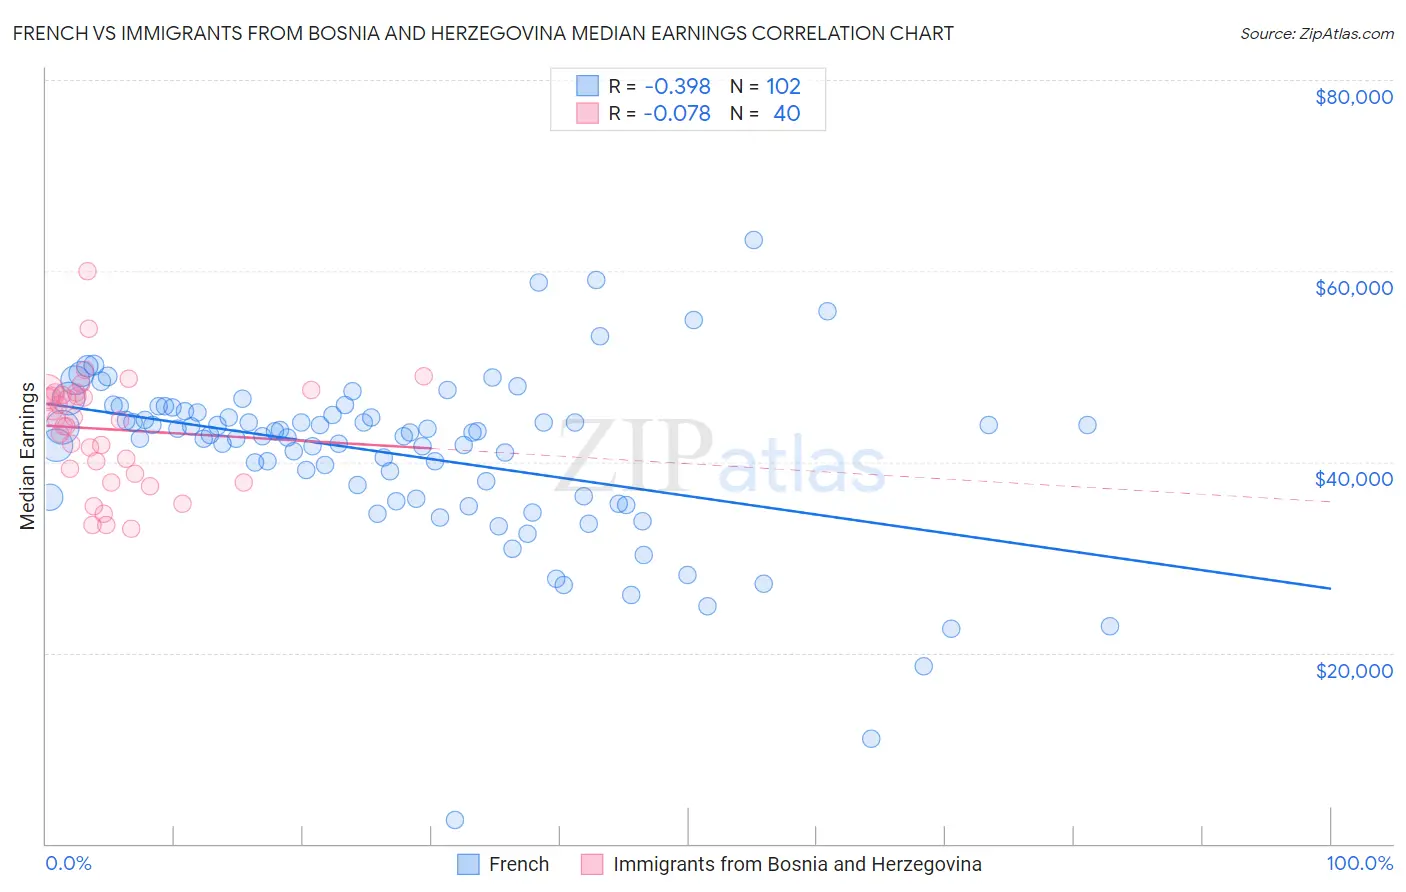 French vs Immigrants from Bosnia and Herzegovina Median Earnings